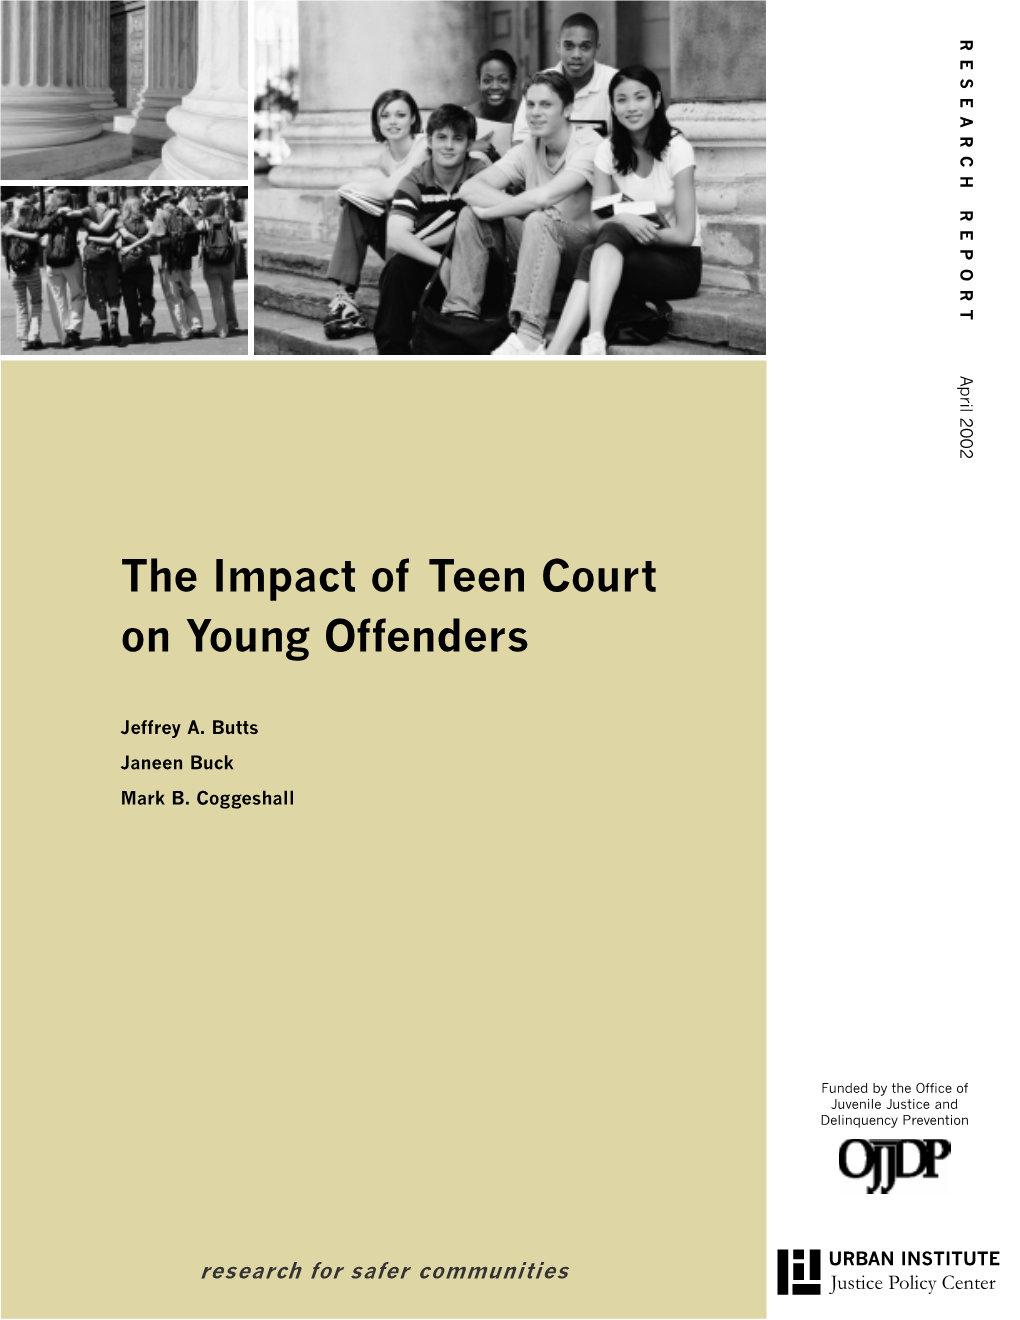 The Impact of Teen Court on Young Offenders